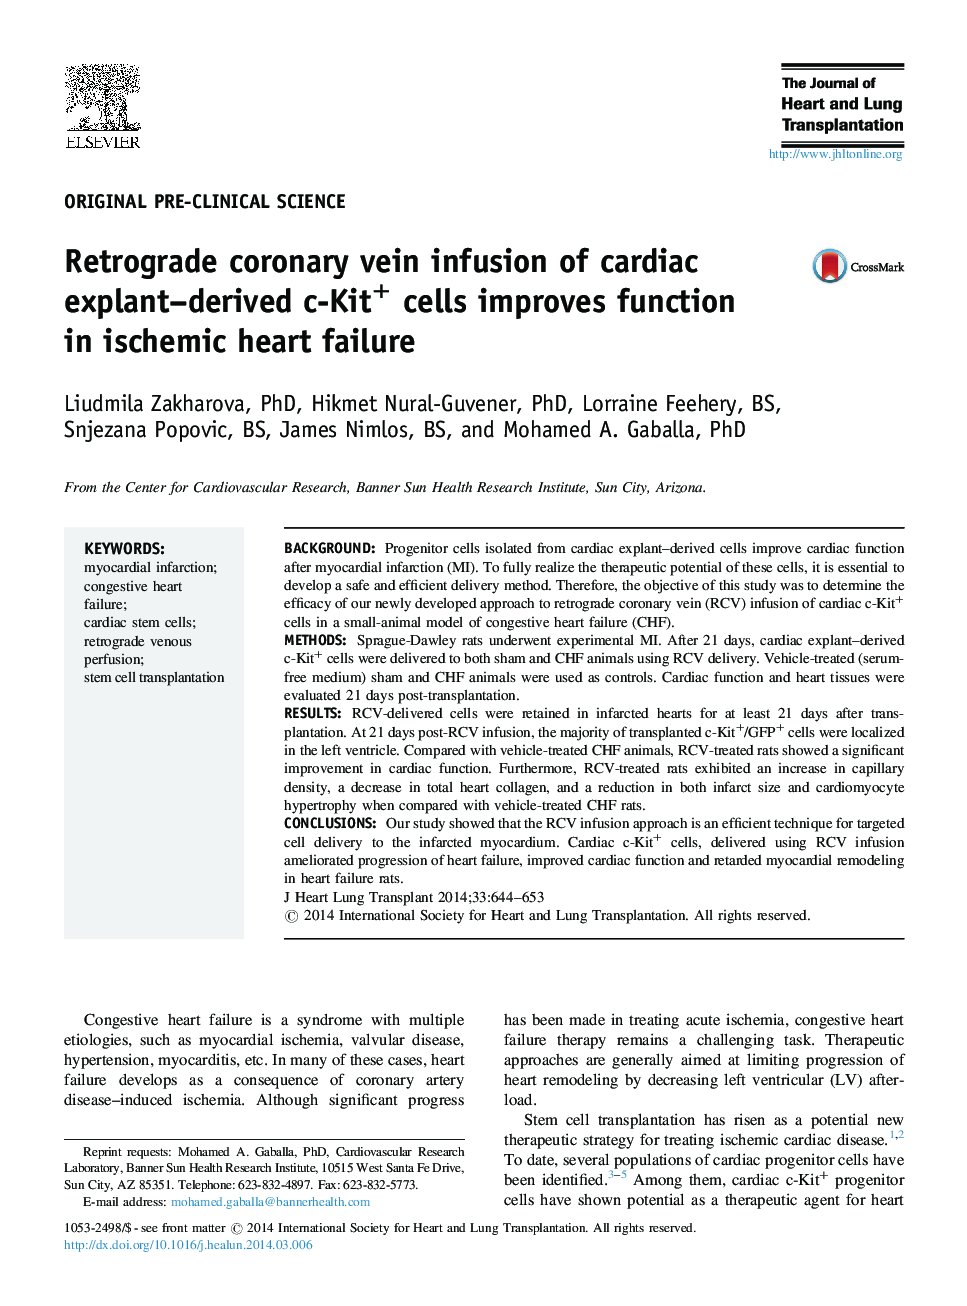 Retrograde coronary vein infusion of cardiac explant-derived c-Kit+ cells improves function in ischemic heart failure